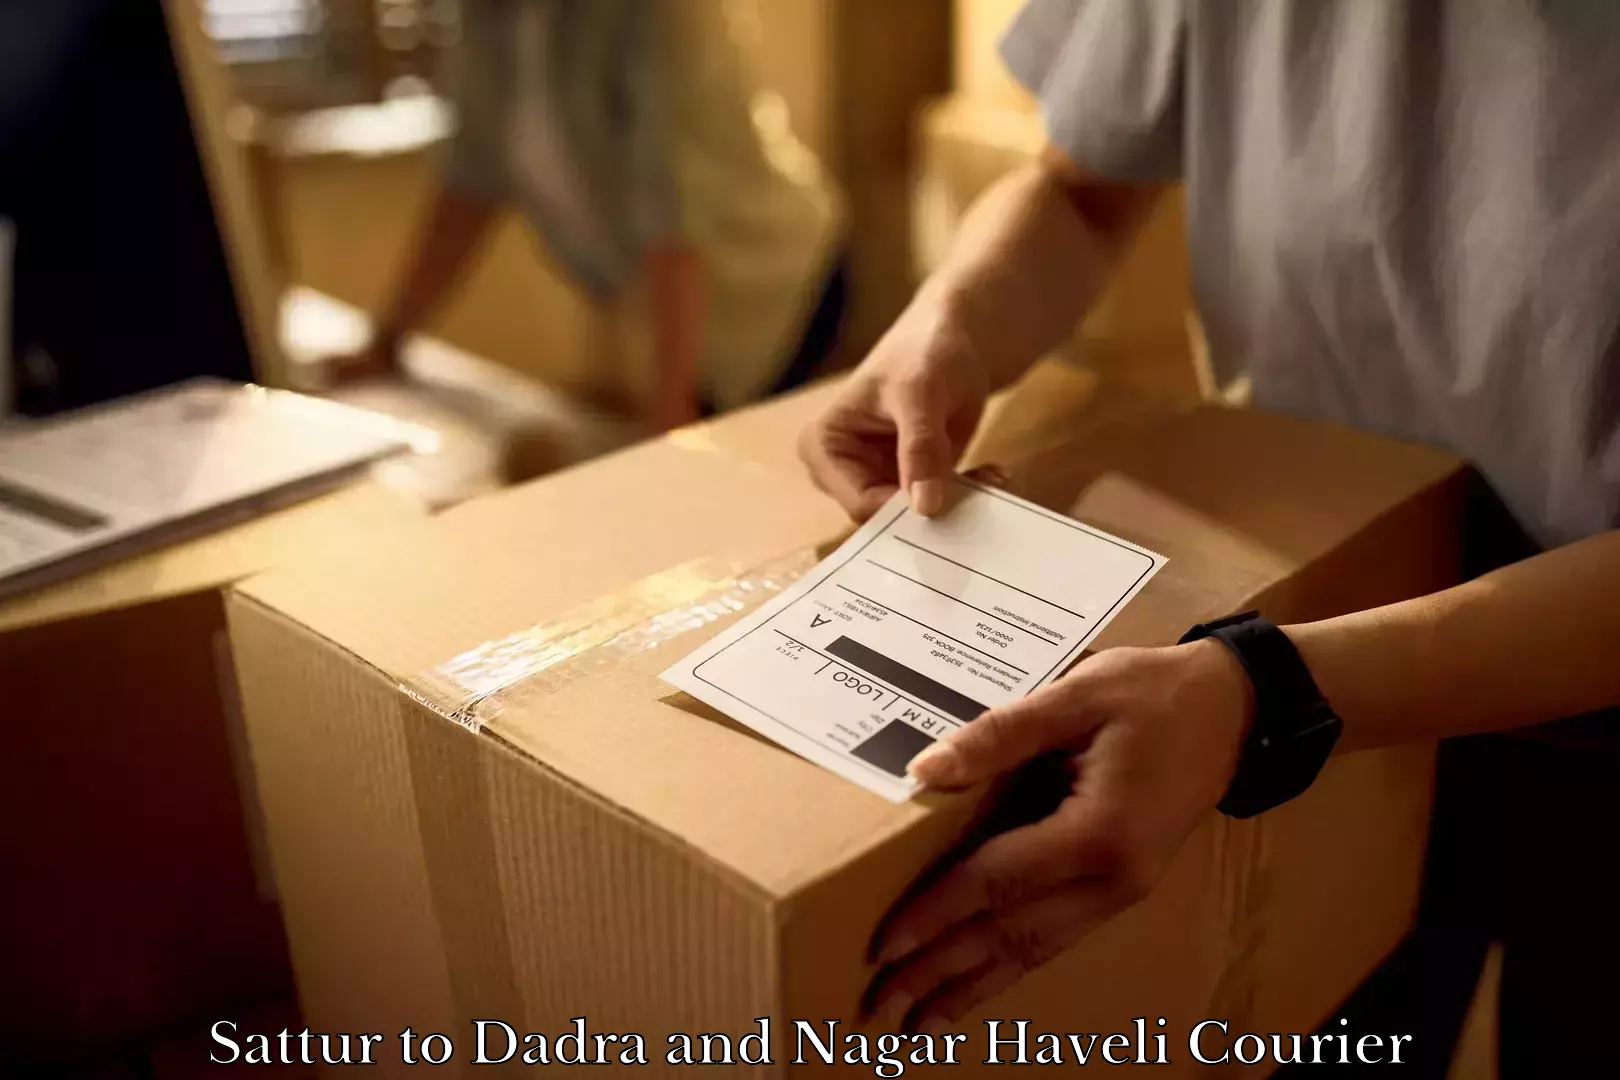 Furniture moving specialists Sattur to Dadra and Nagar Haveli